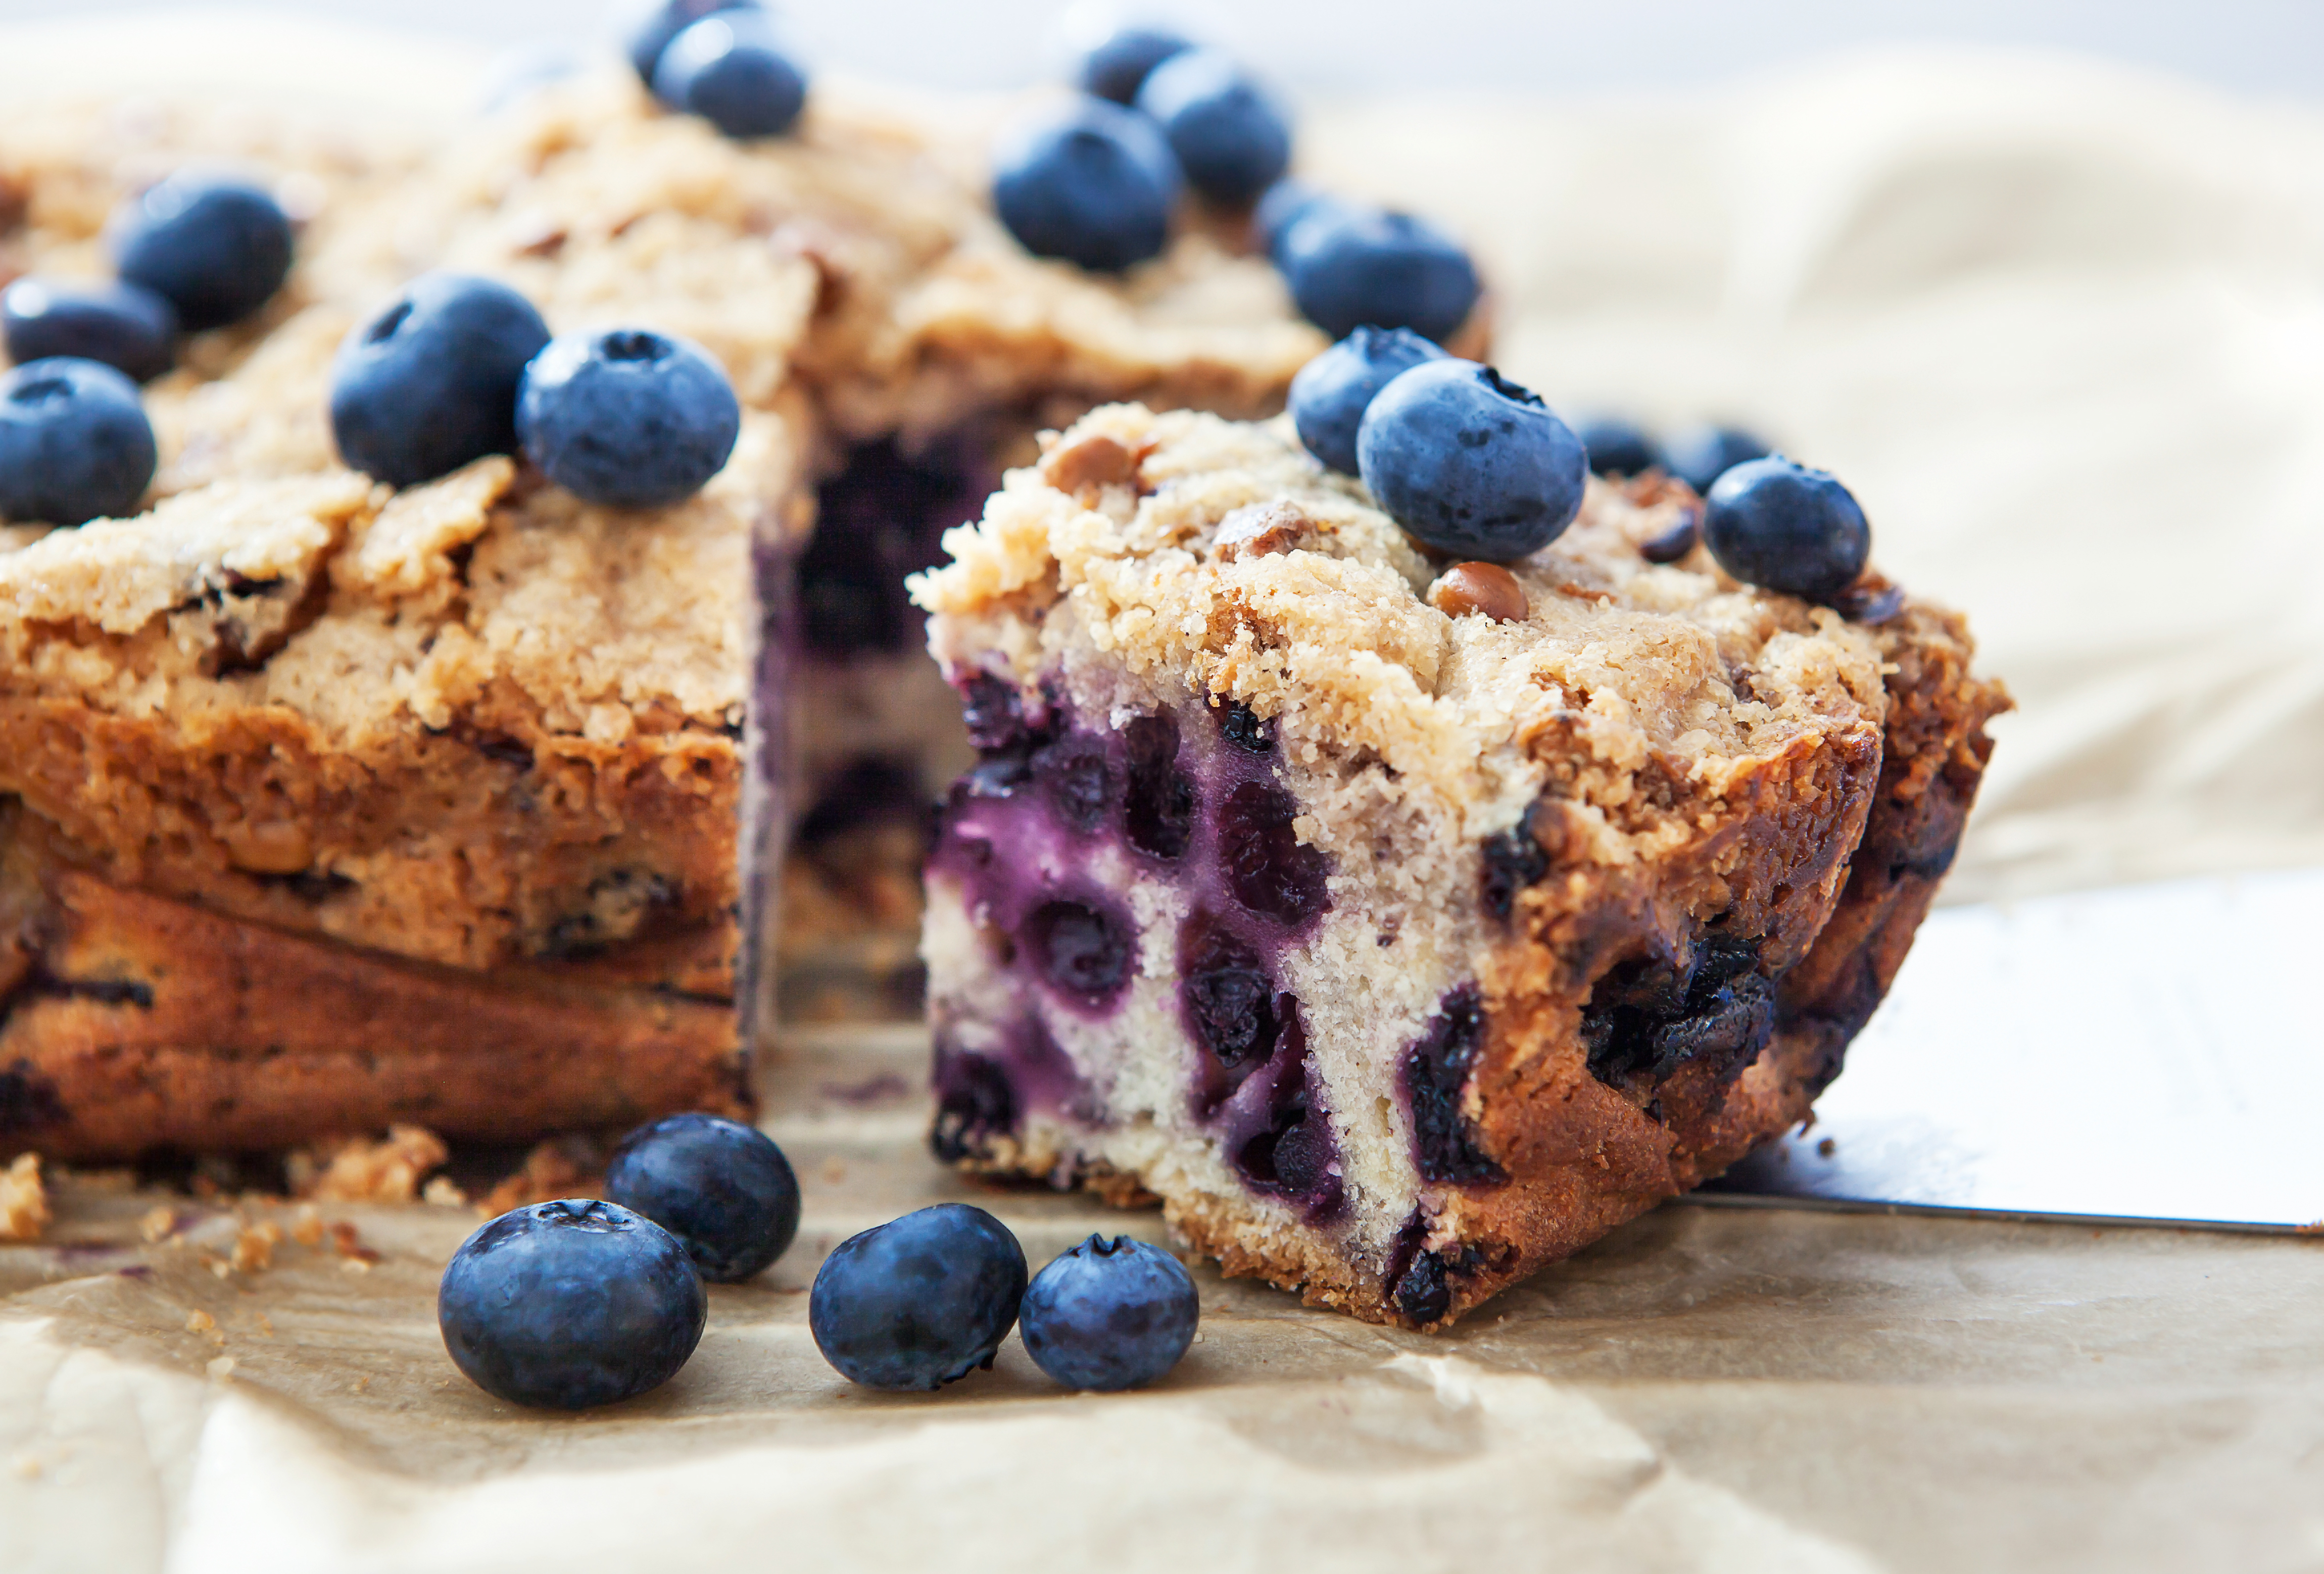 Experience an 8 Day Amazing Vacation in Maine with Family - Blueberry Cake